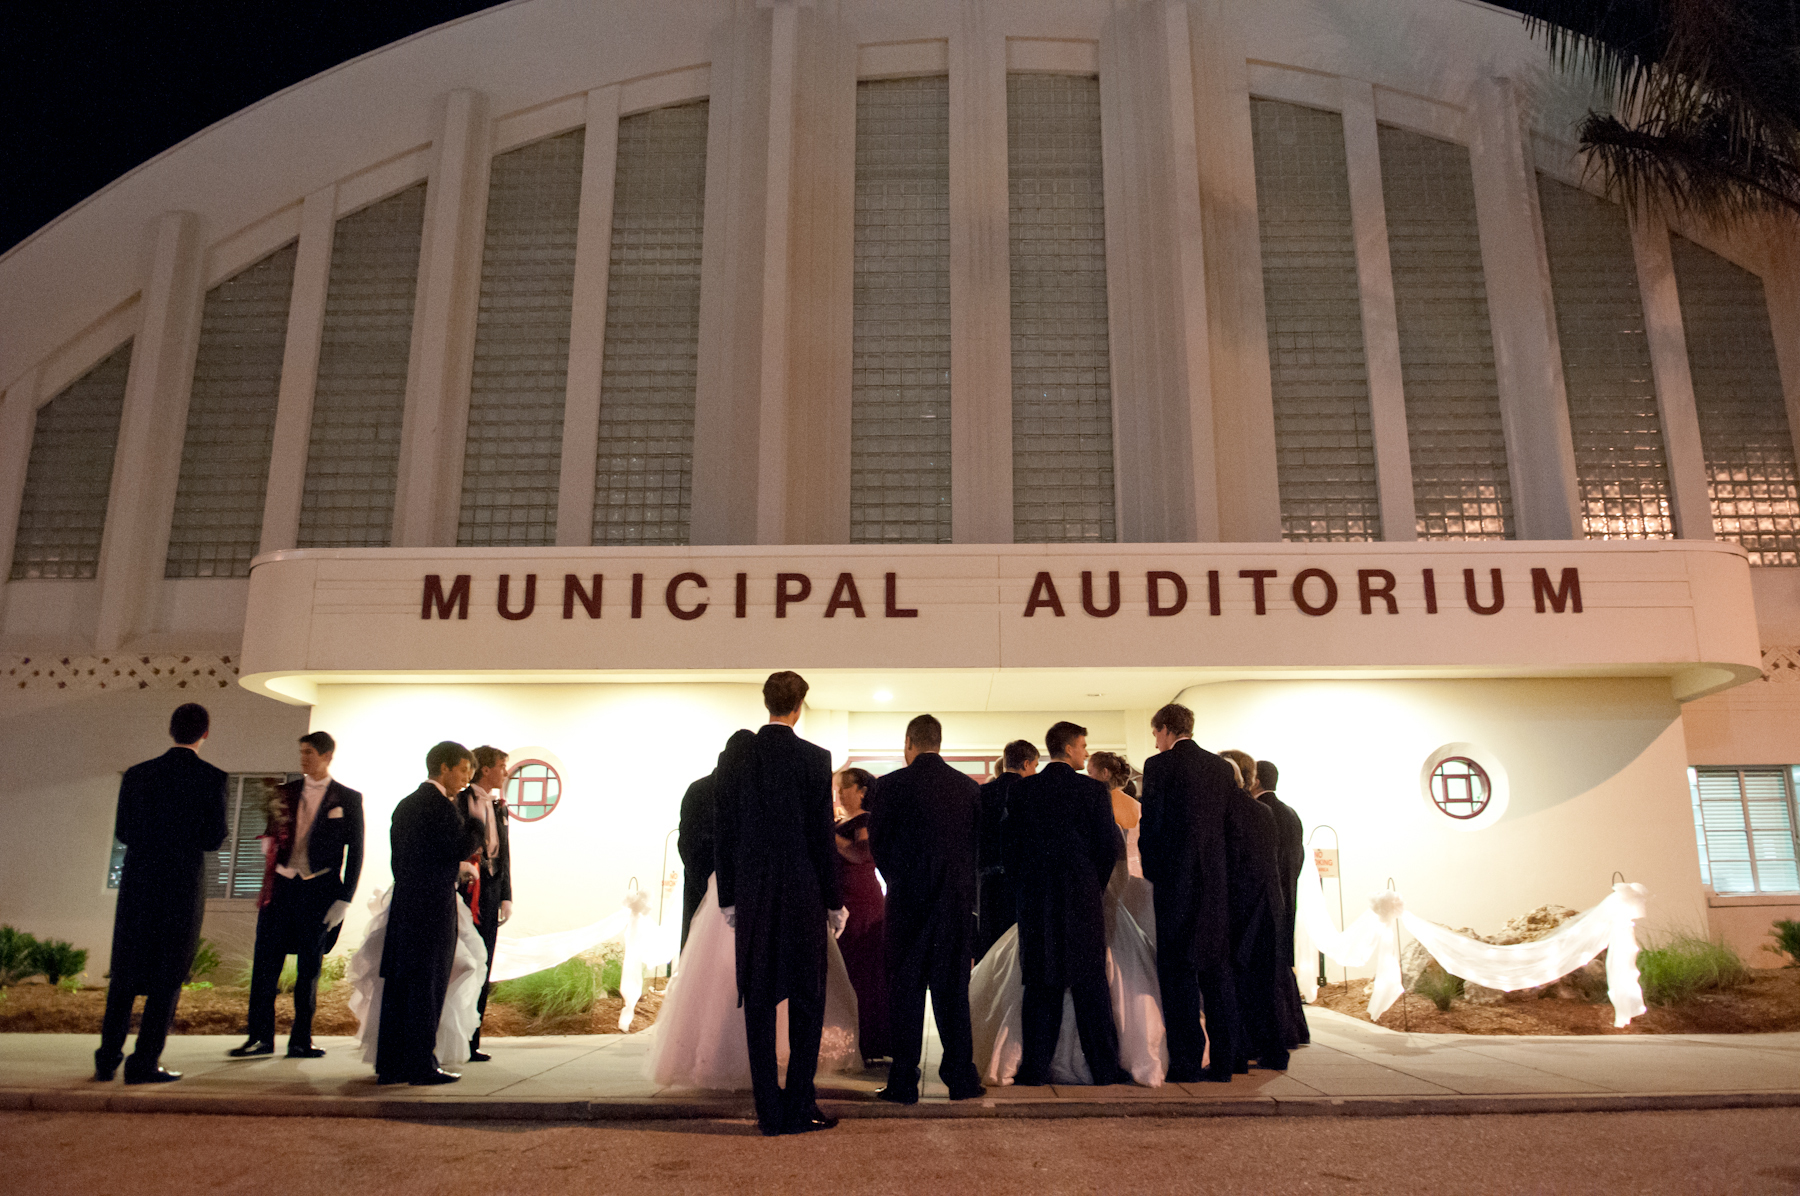 Although the city generates some revenue from rentals of the Municipal Auditorium, operating the facility has generated hundreds of thousands of dollars in losses over the past decade. File photo